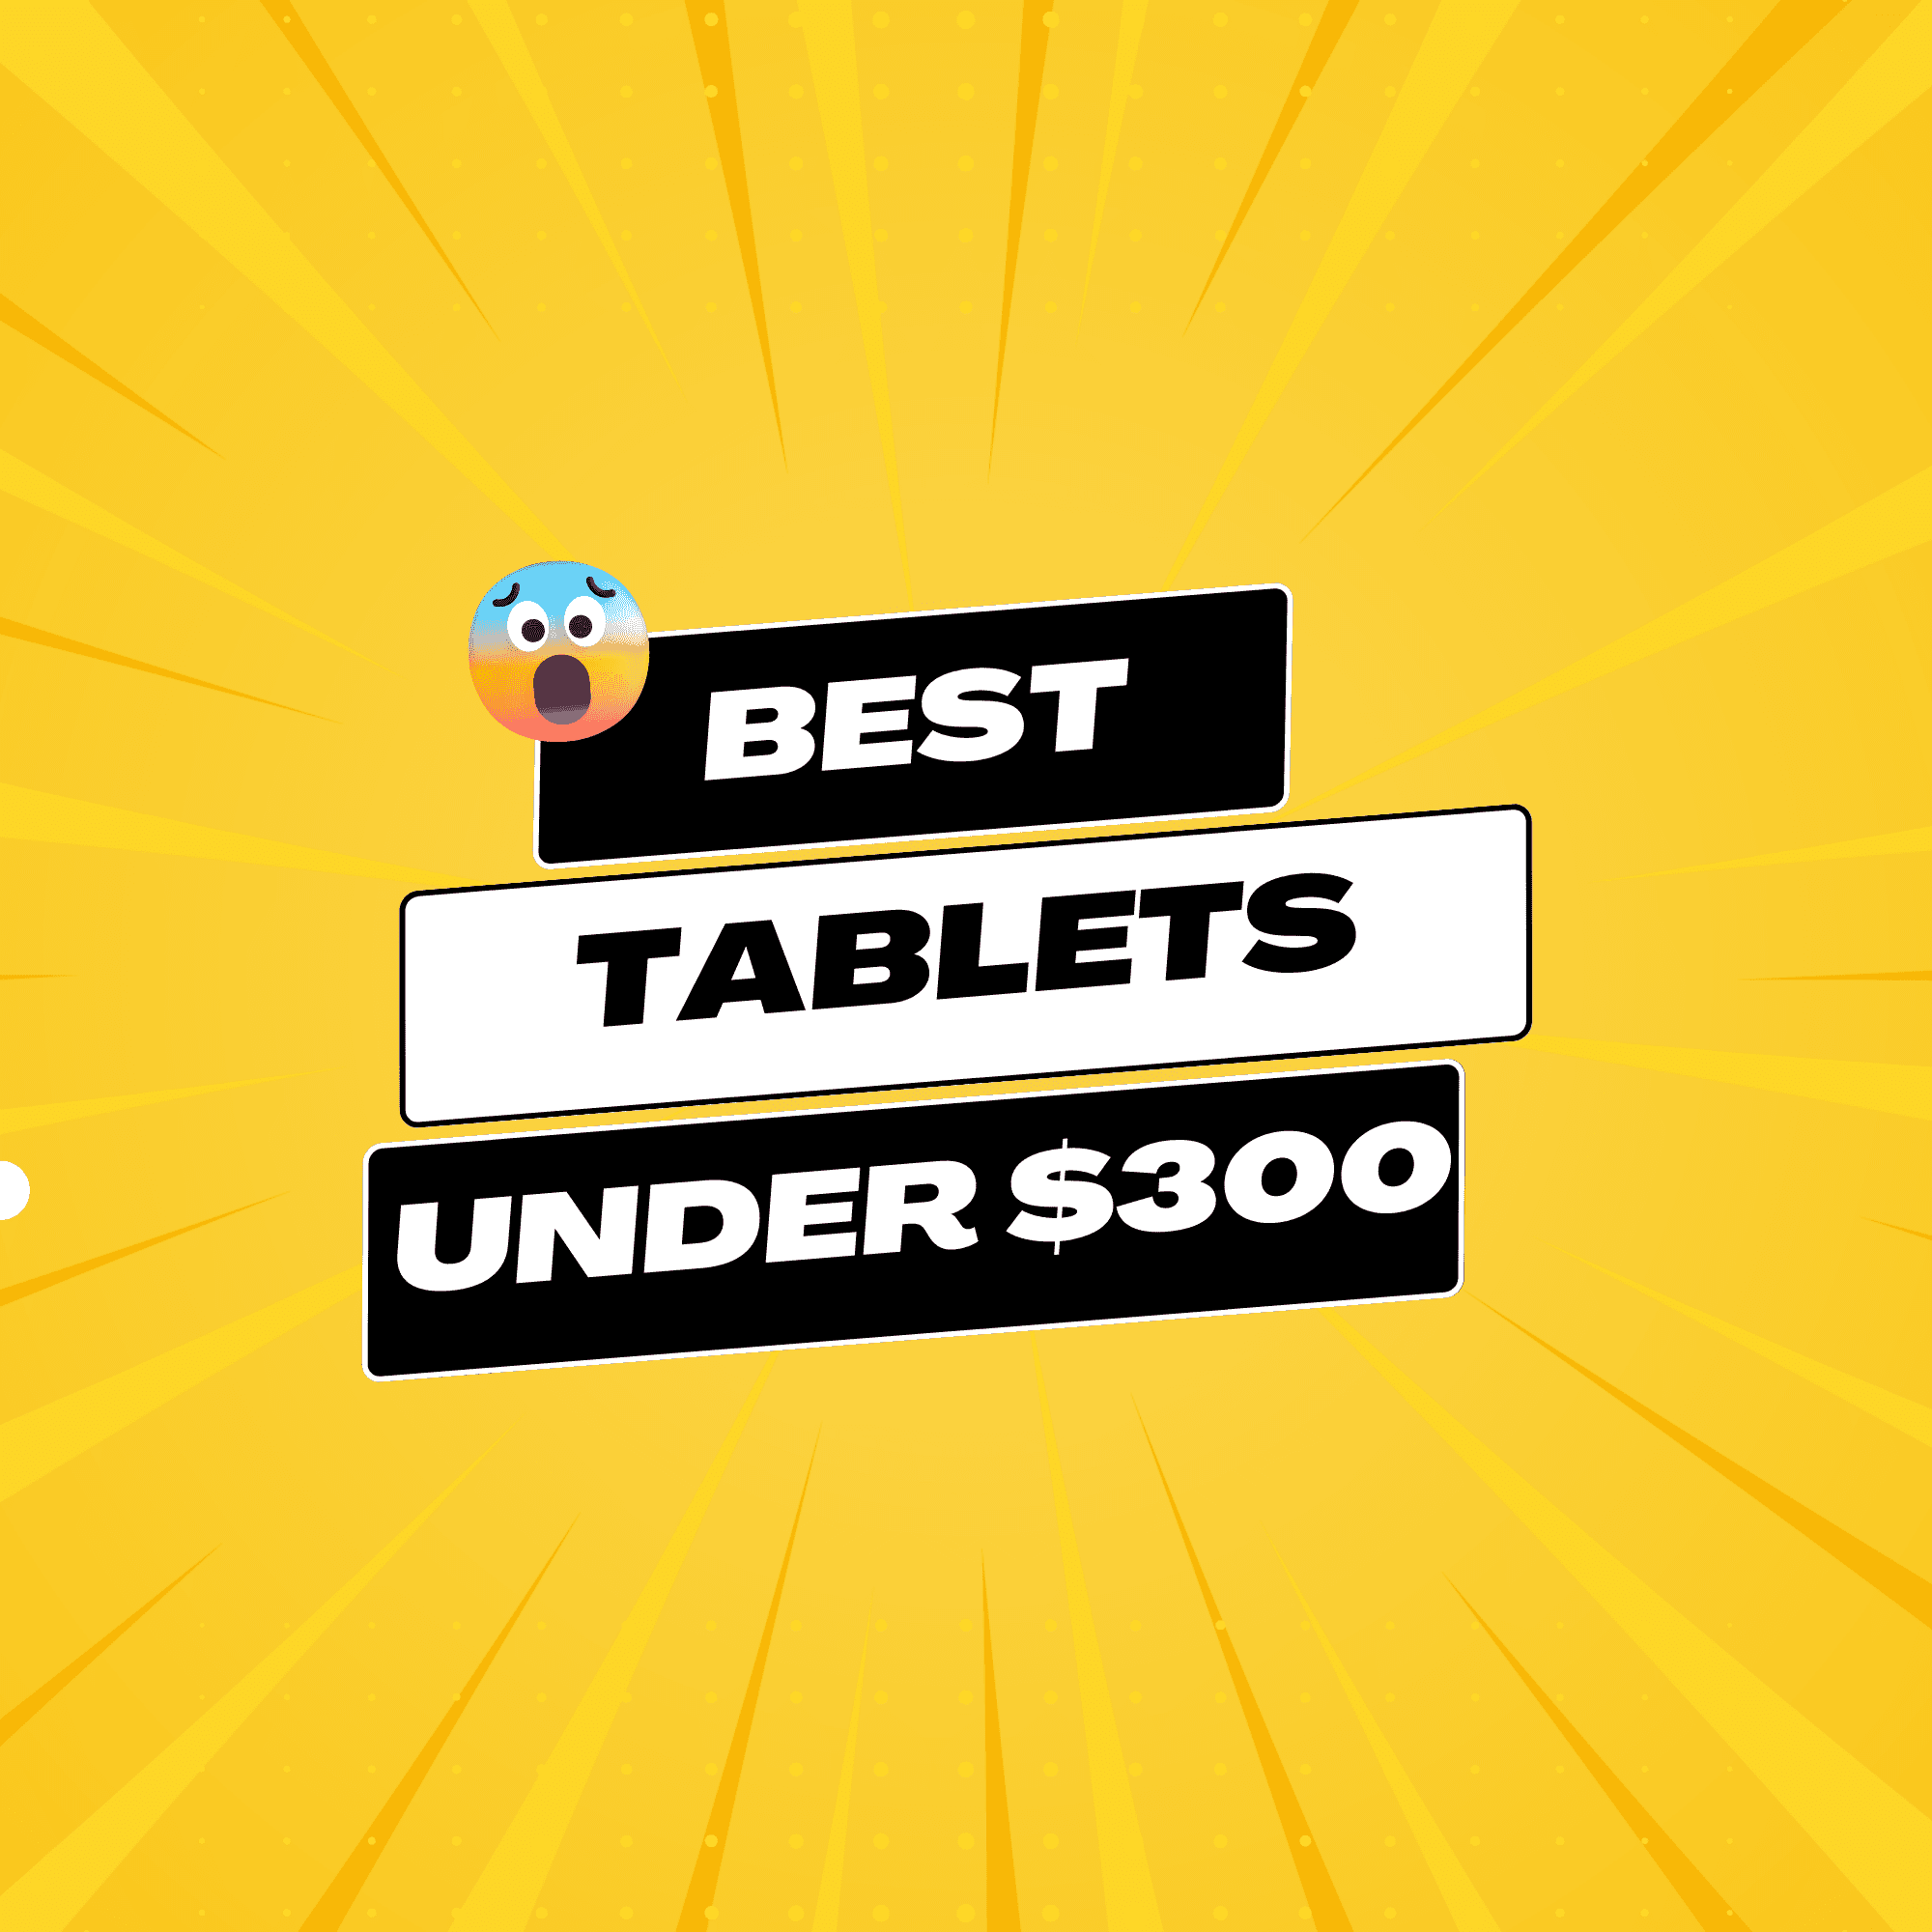 best tablets under $300 usd